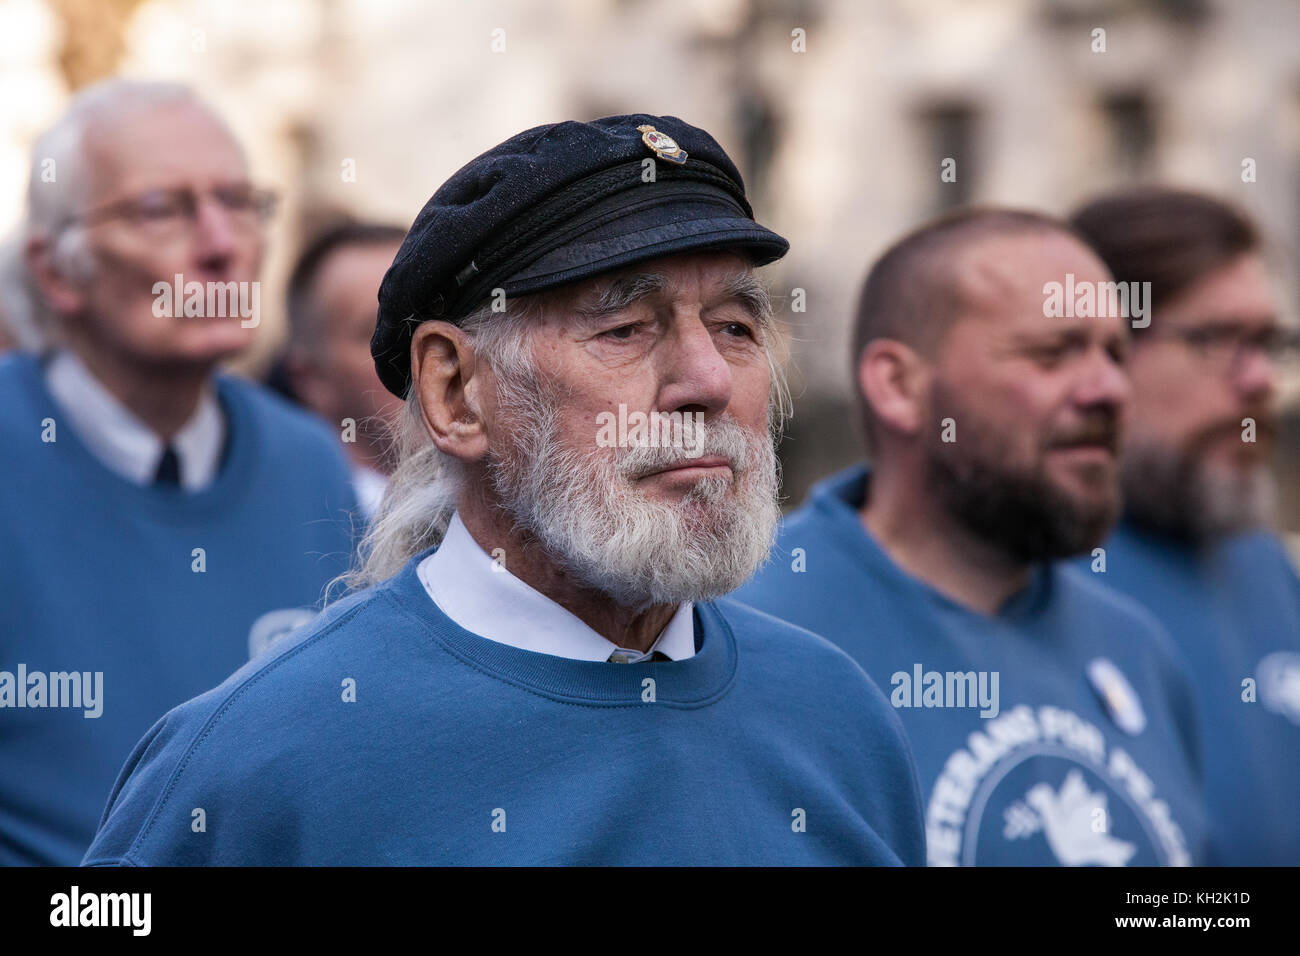 London, UK. 12th November, 2017. Jim Radford, D-Day veteran, folk singer and peace campaigner, prepares to walk to the Cenotaph with ex-services men and women from Veterans For Peace UK (VFP UK) on Remembrance Sunday. VFP UK was founded in 2011 and works to influence the foreign and defence policy of the UK for the larger purpose of world peace. Credit: Mark Kerrison/Alamy Live News Stock Photo